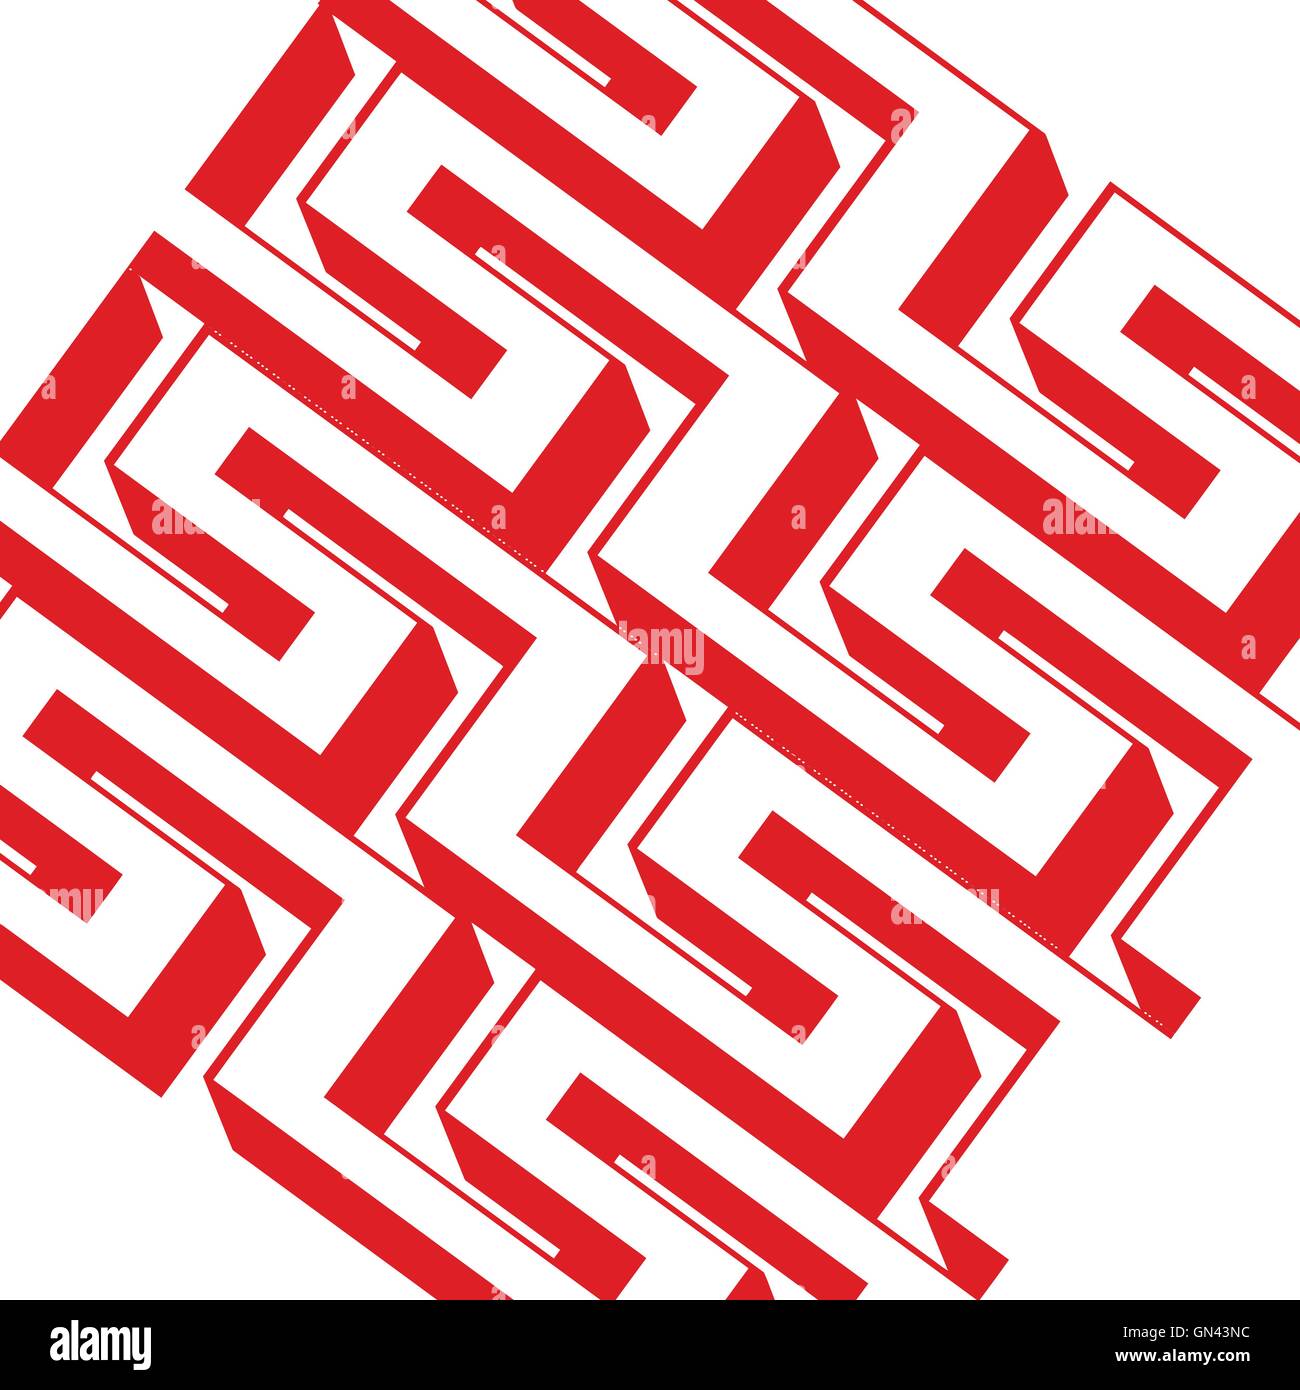 Red labyrinth Stock Vector